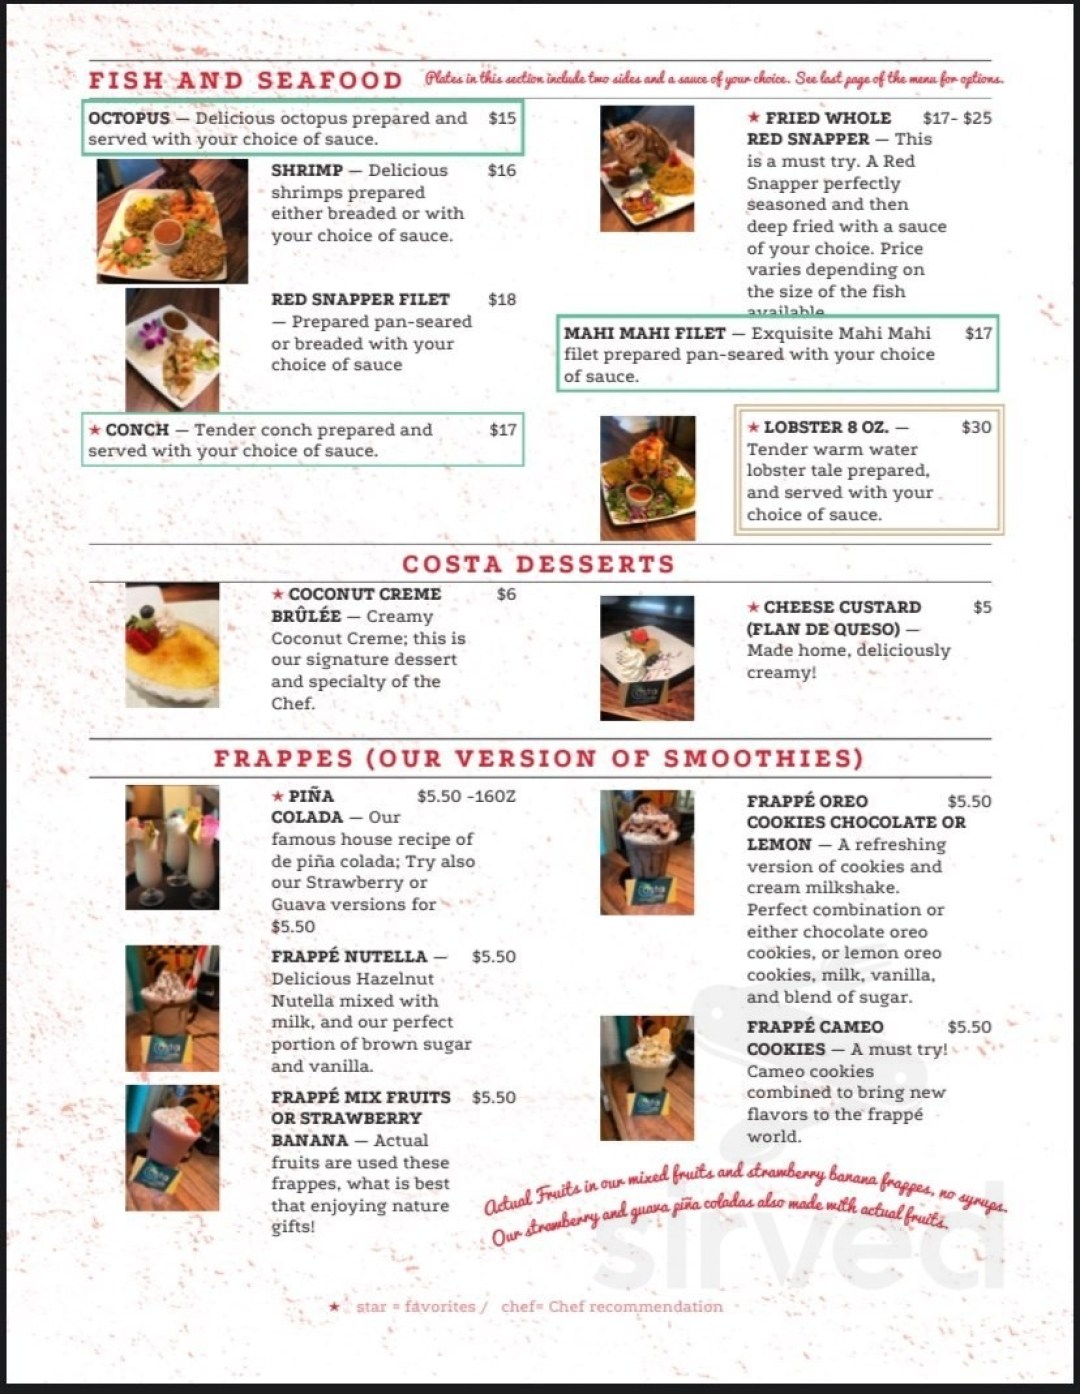 Picture of: CostaMar Seafood and Grill Restaurant menu in Killeen, Texas, USA